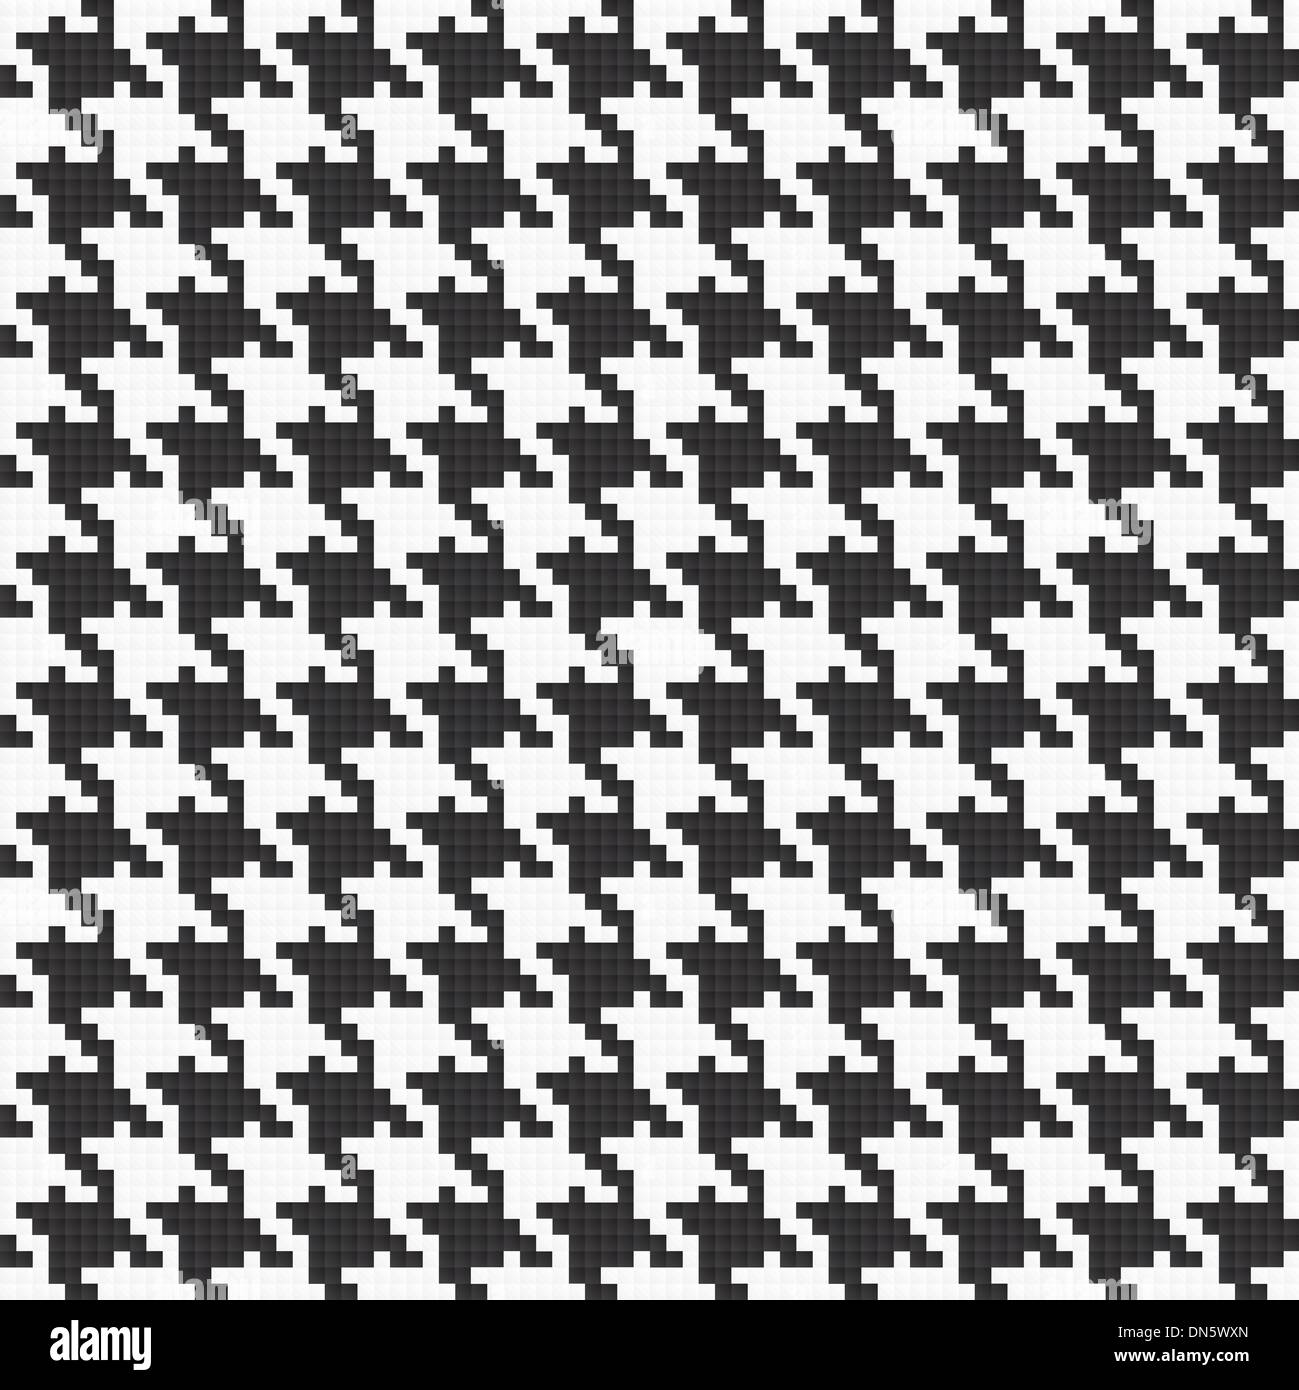 Seamless Houndstooth Pattern Stock Vector